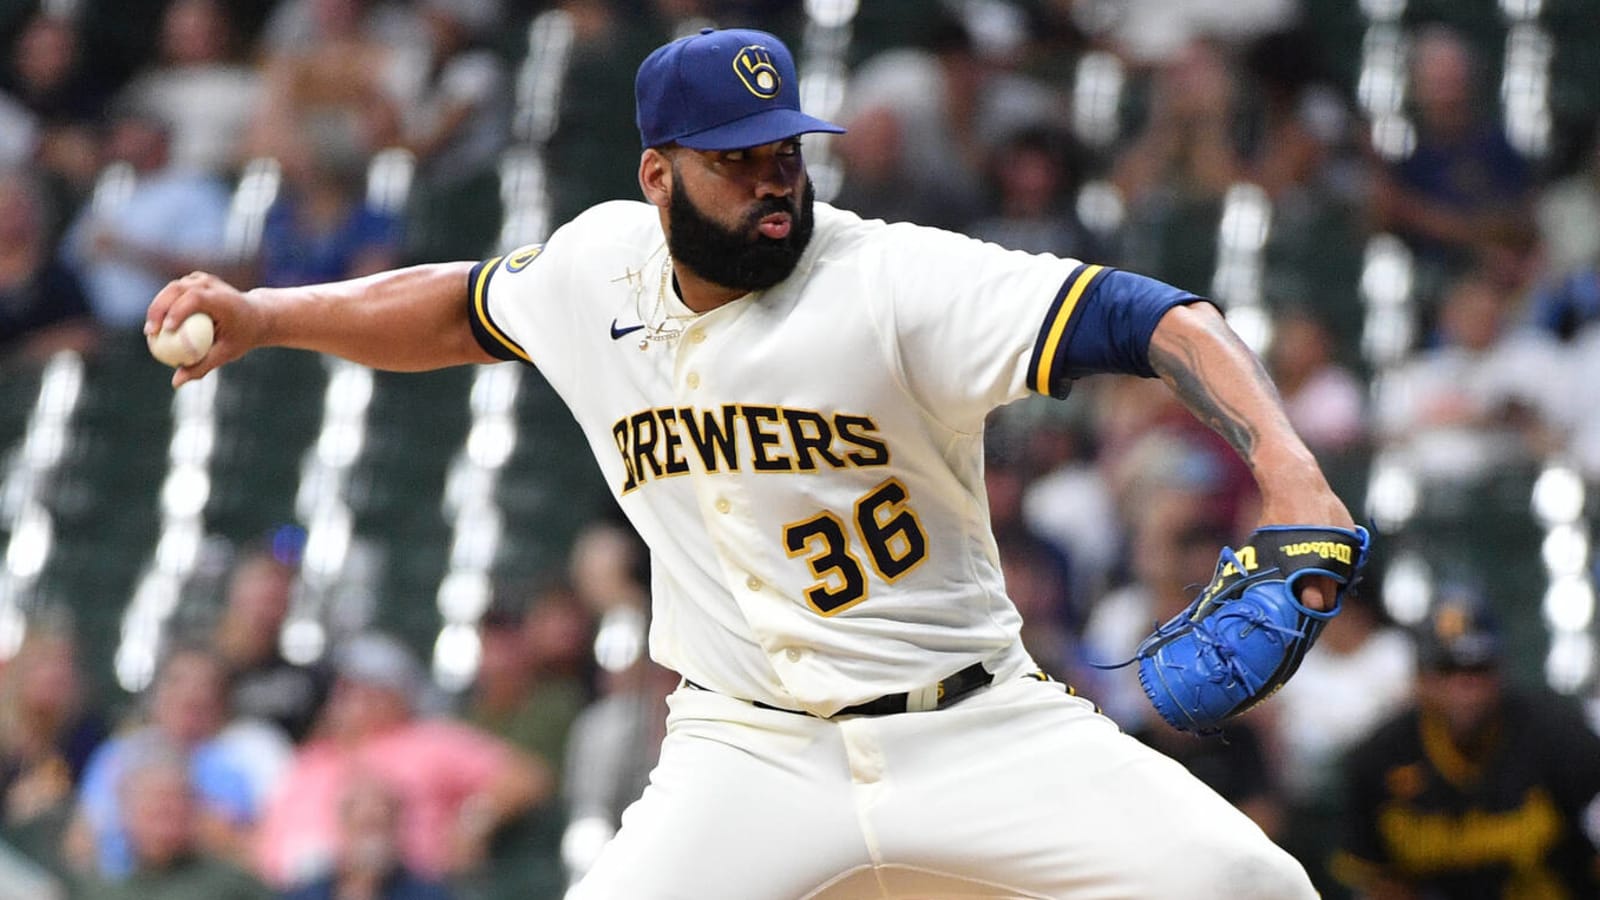 Brewers pitcher suspended 162 games for positive PED test